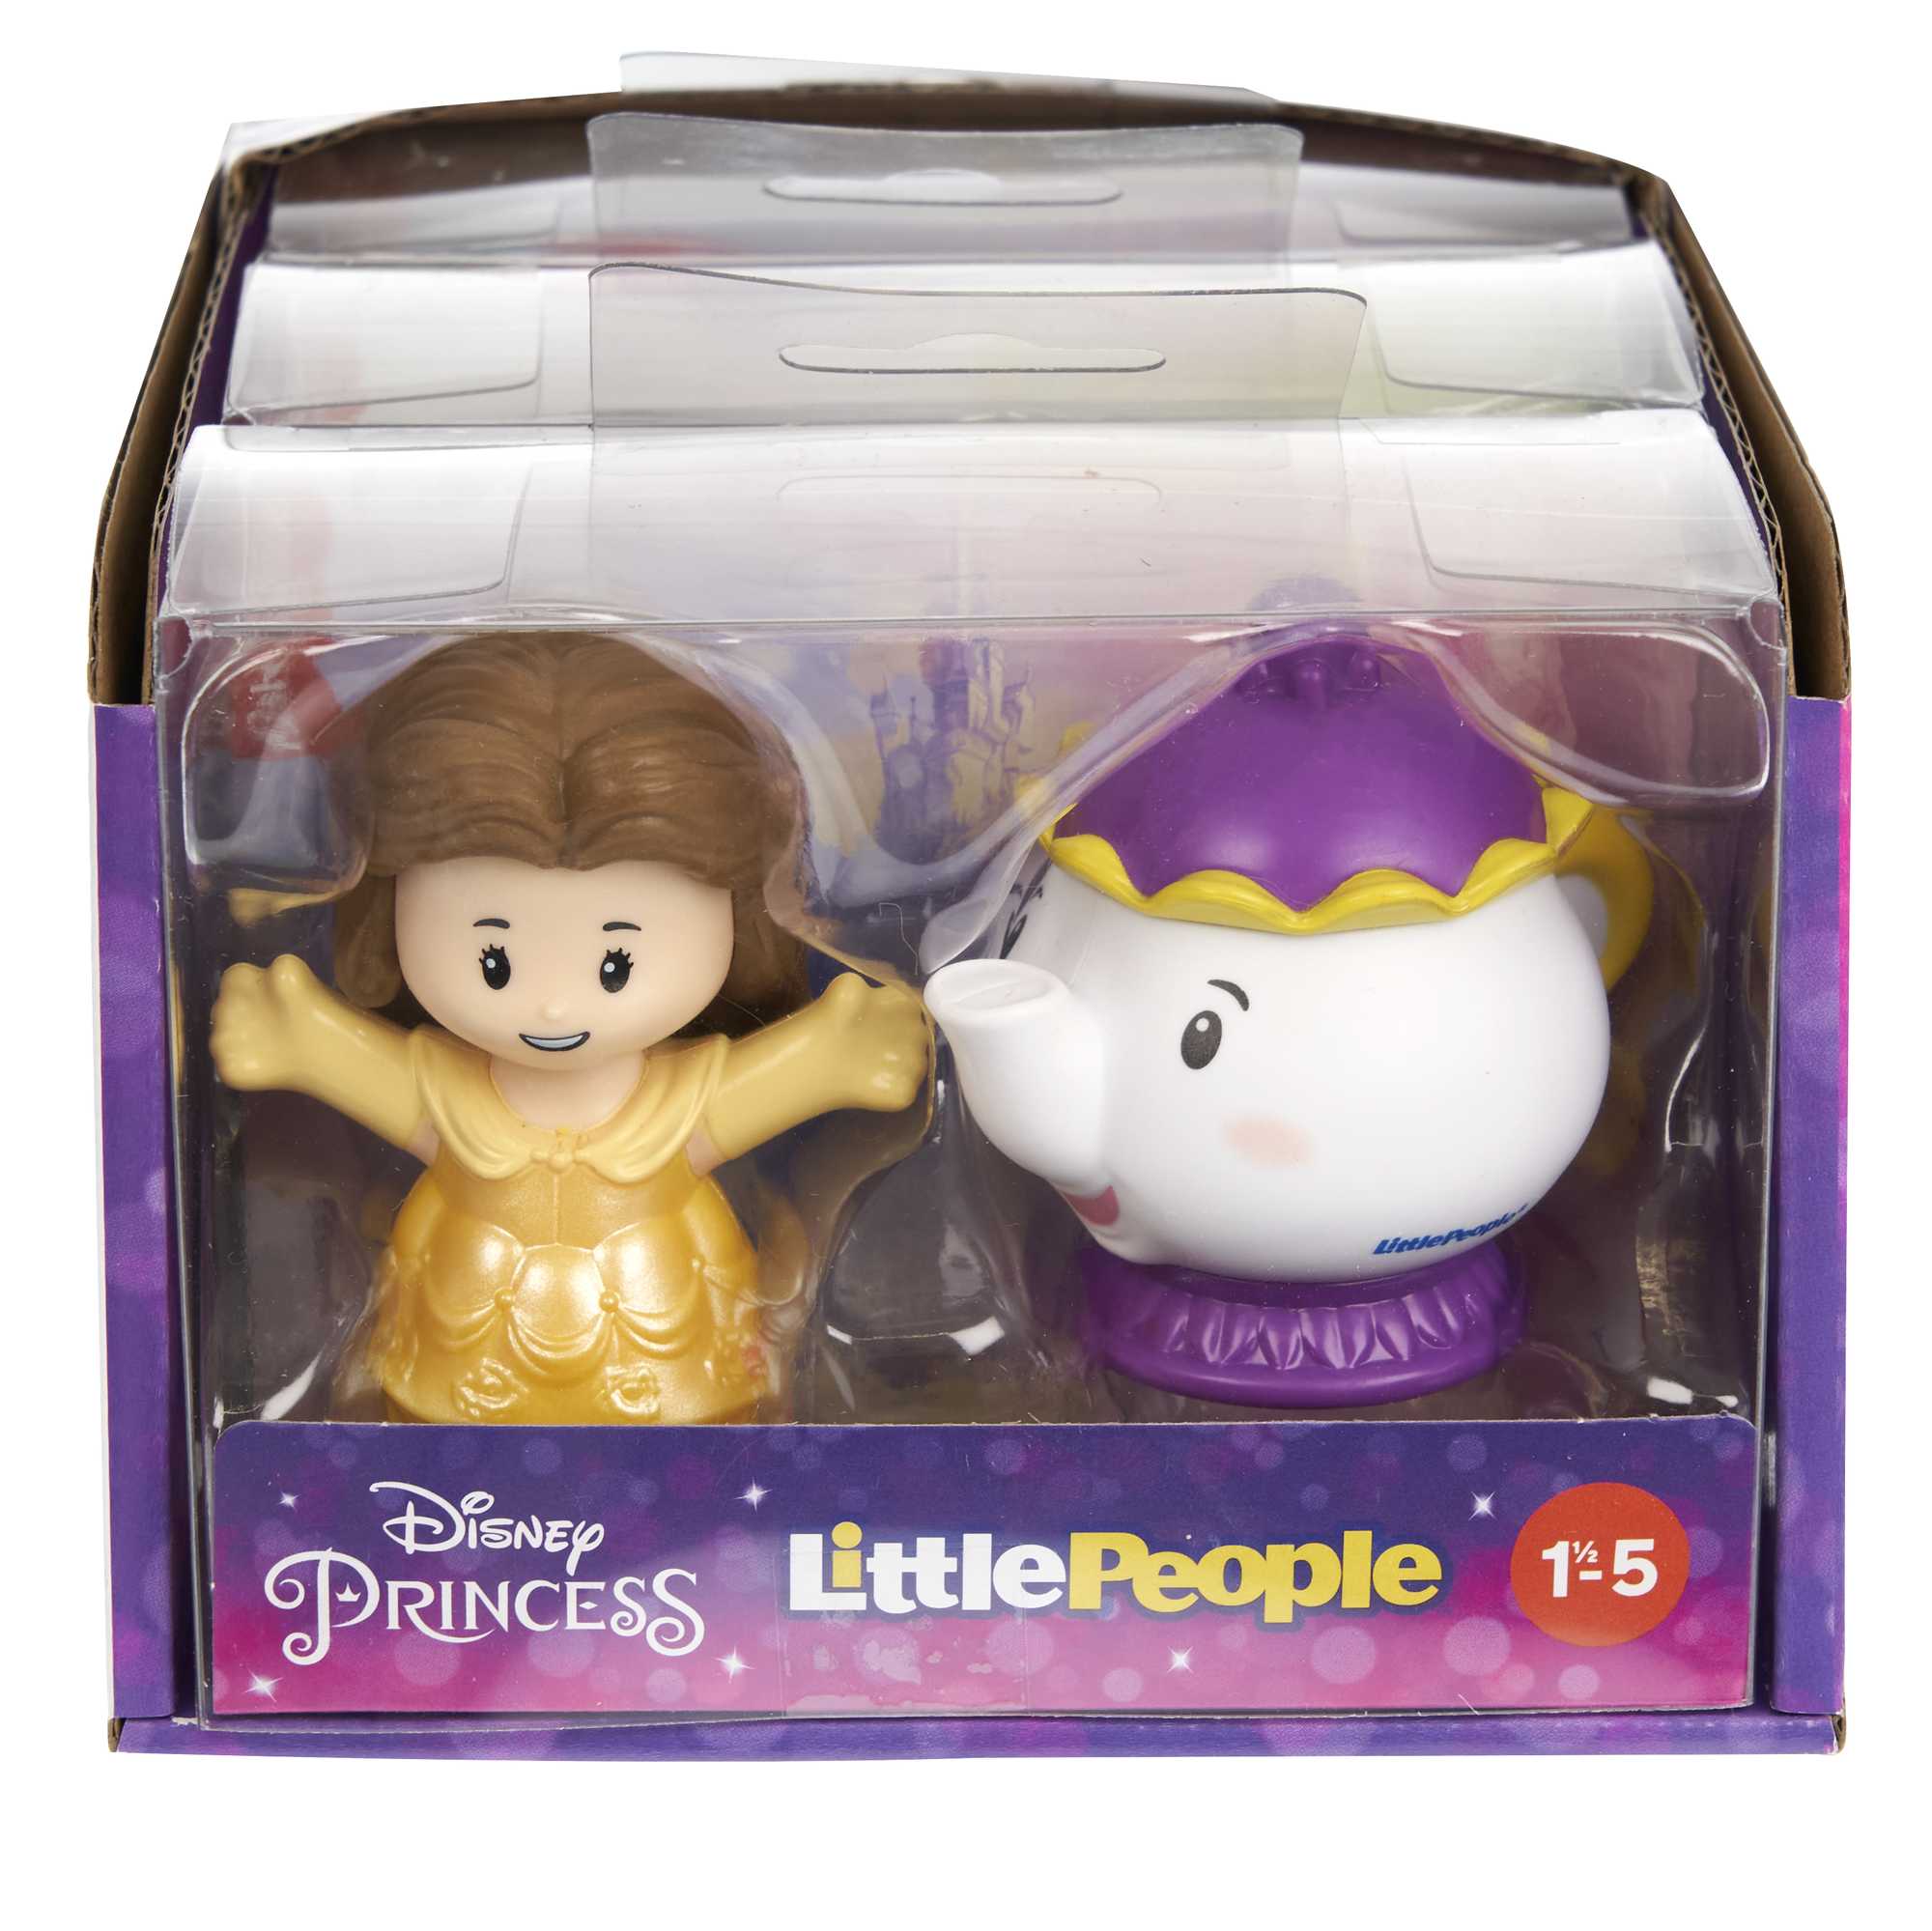 Little People Disney Princess Figures 7pk Toy New with Box